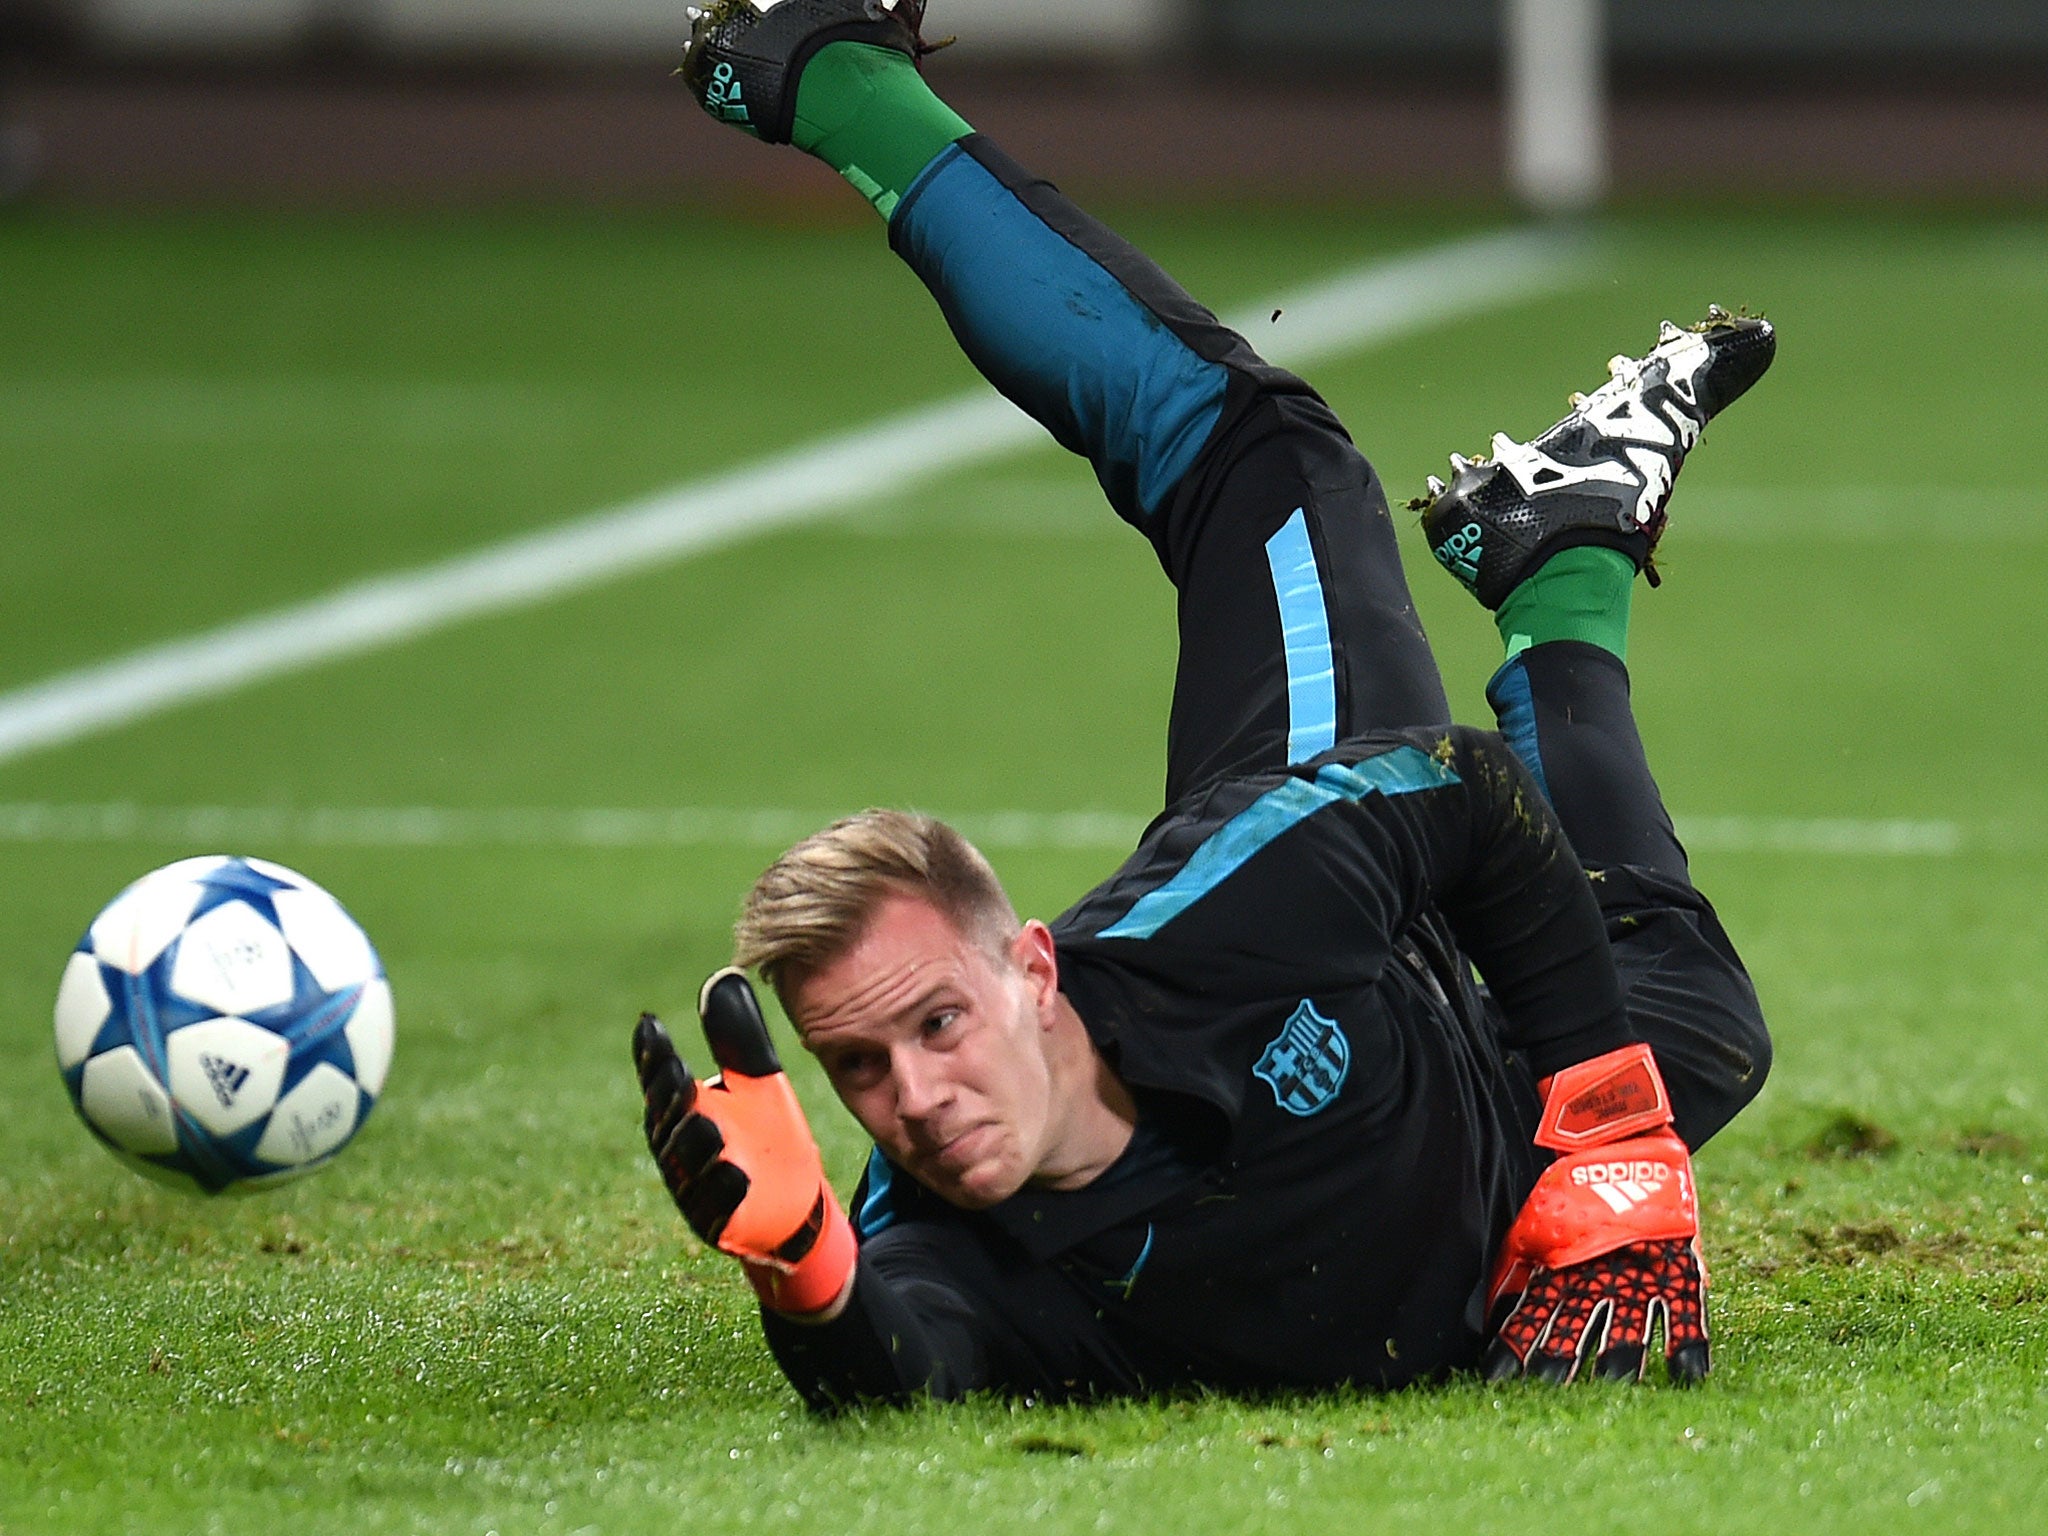 Ter Stegen is said to be considering his future at Barcelona